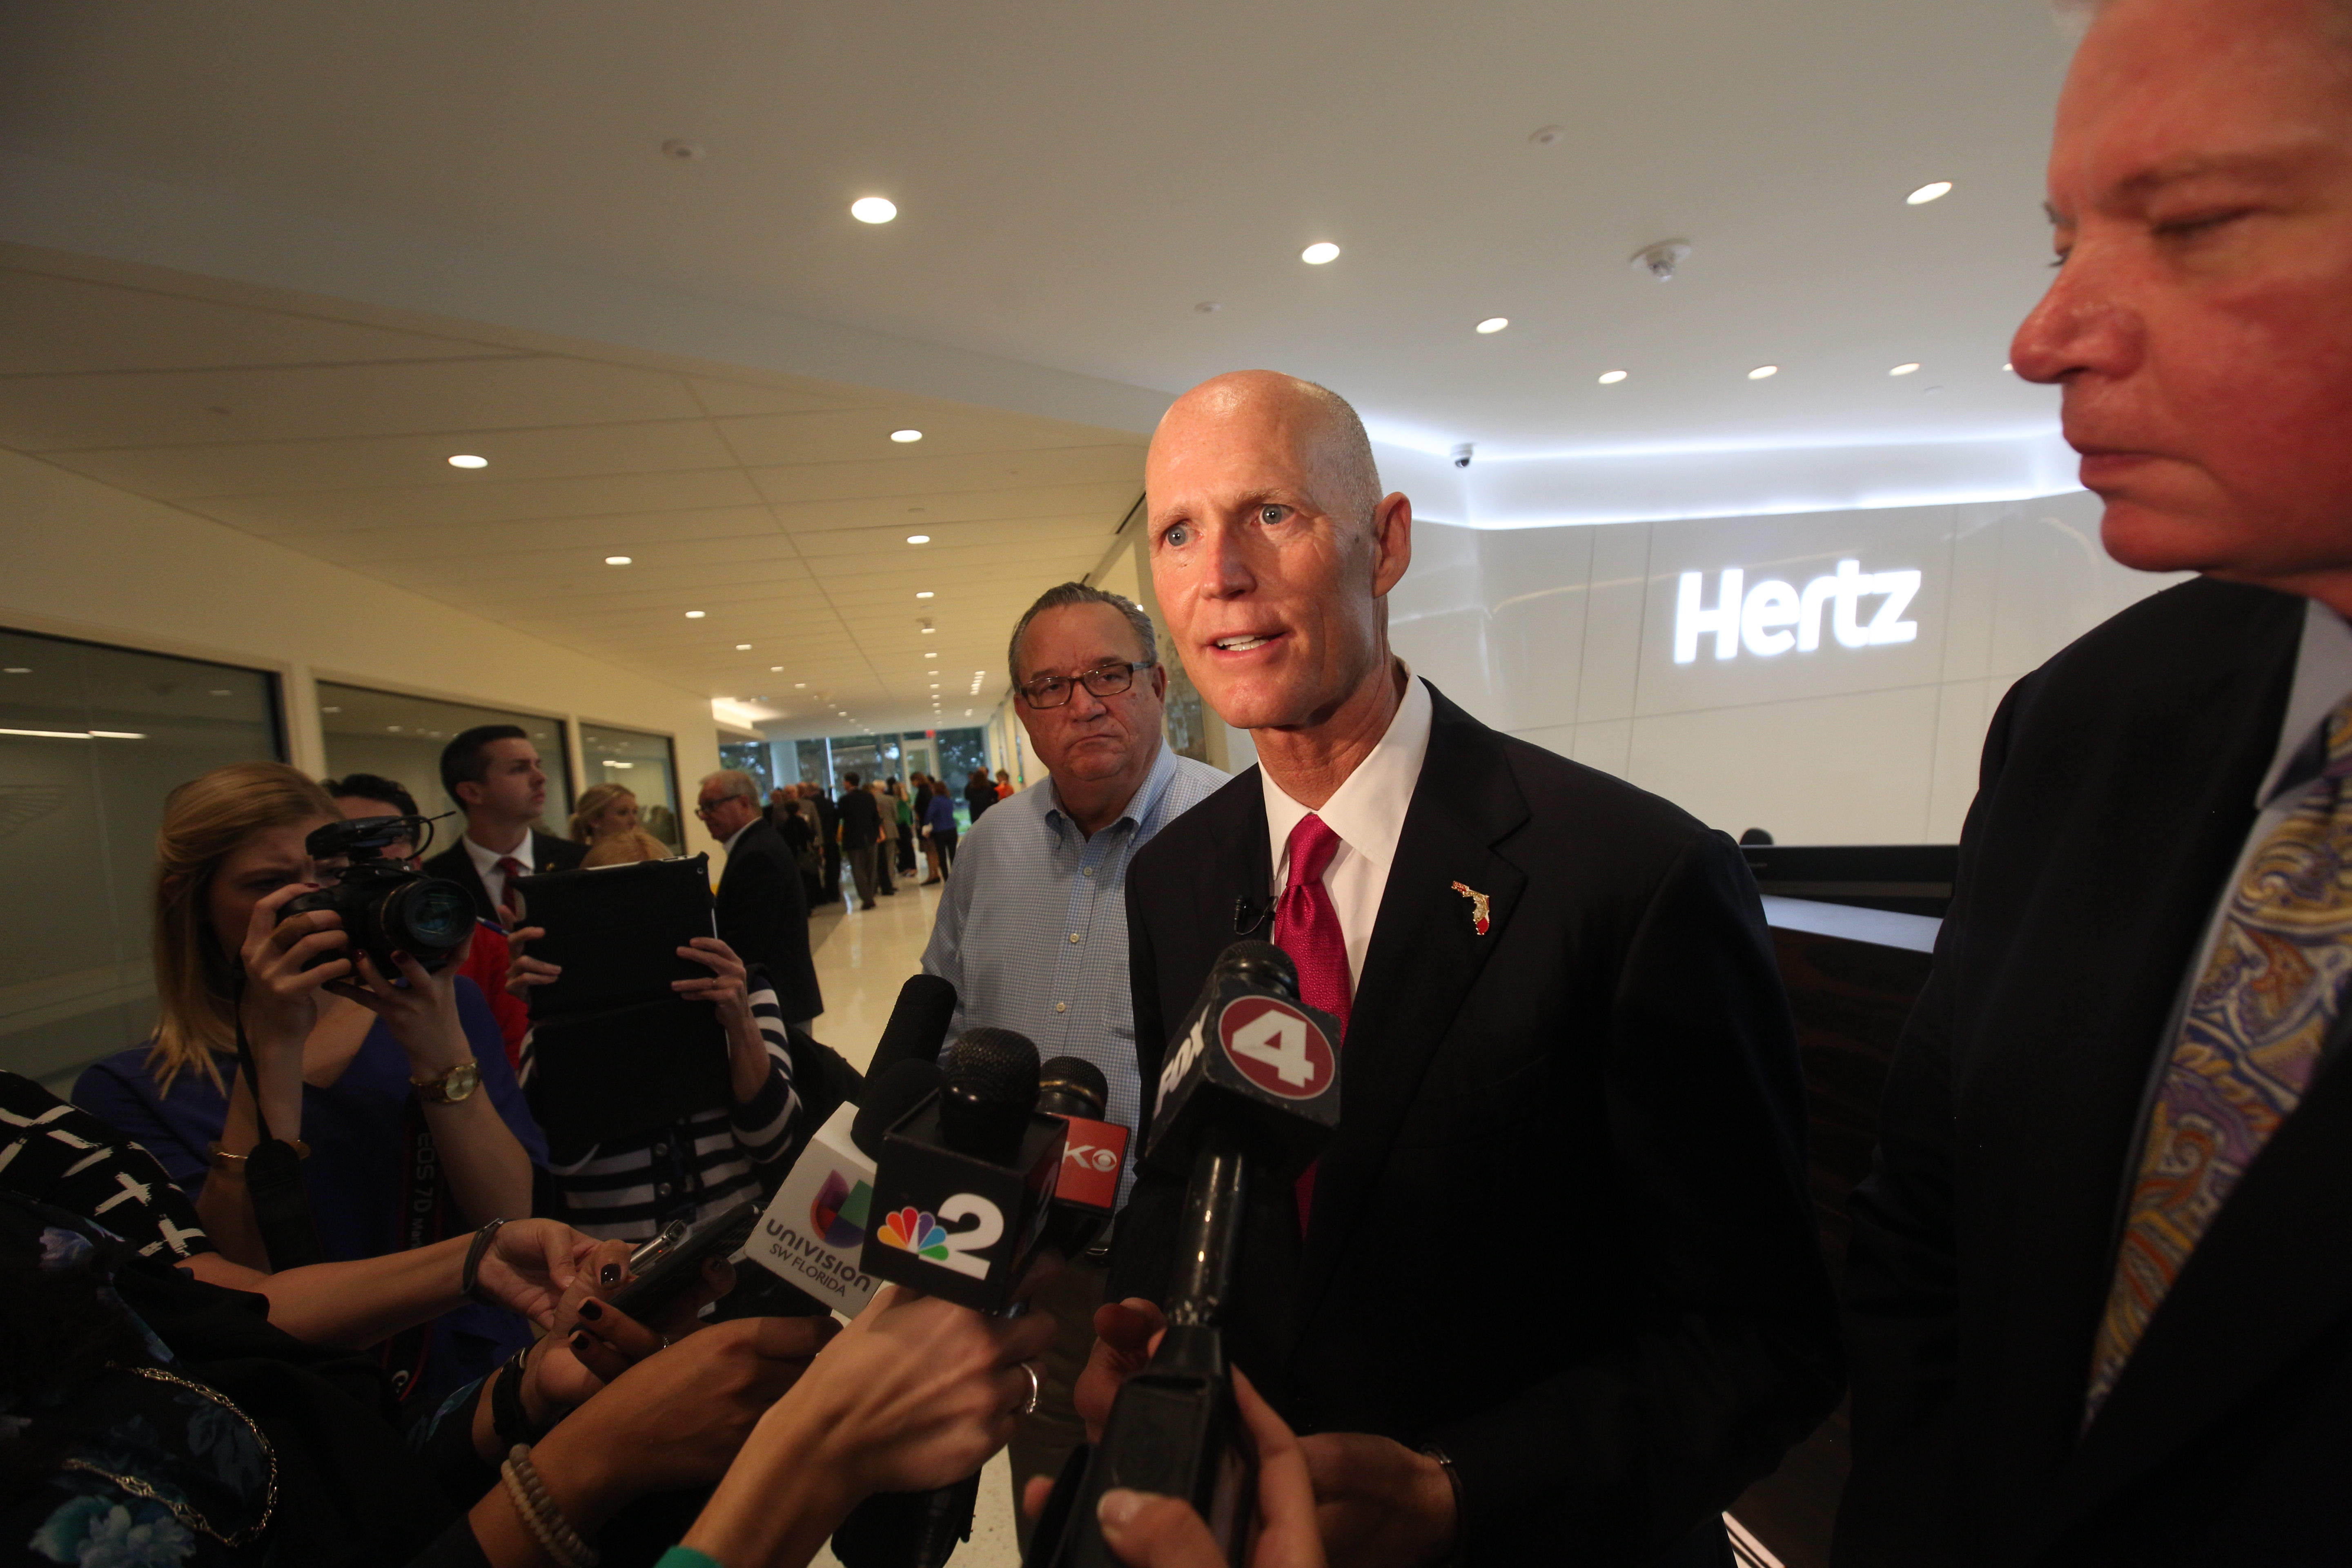 The Hertz Corp. moved its headquarters from New Jersey to Estero during Gov. Rick Scott's first term.